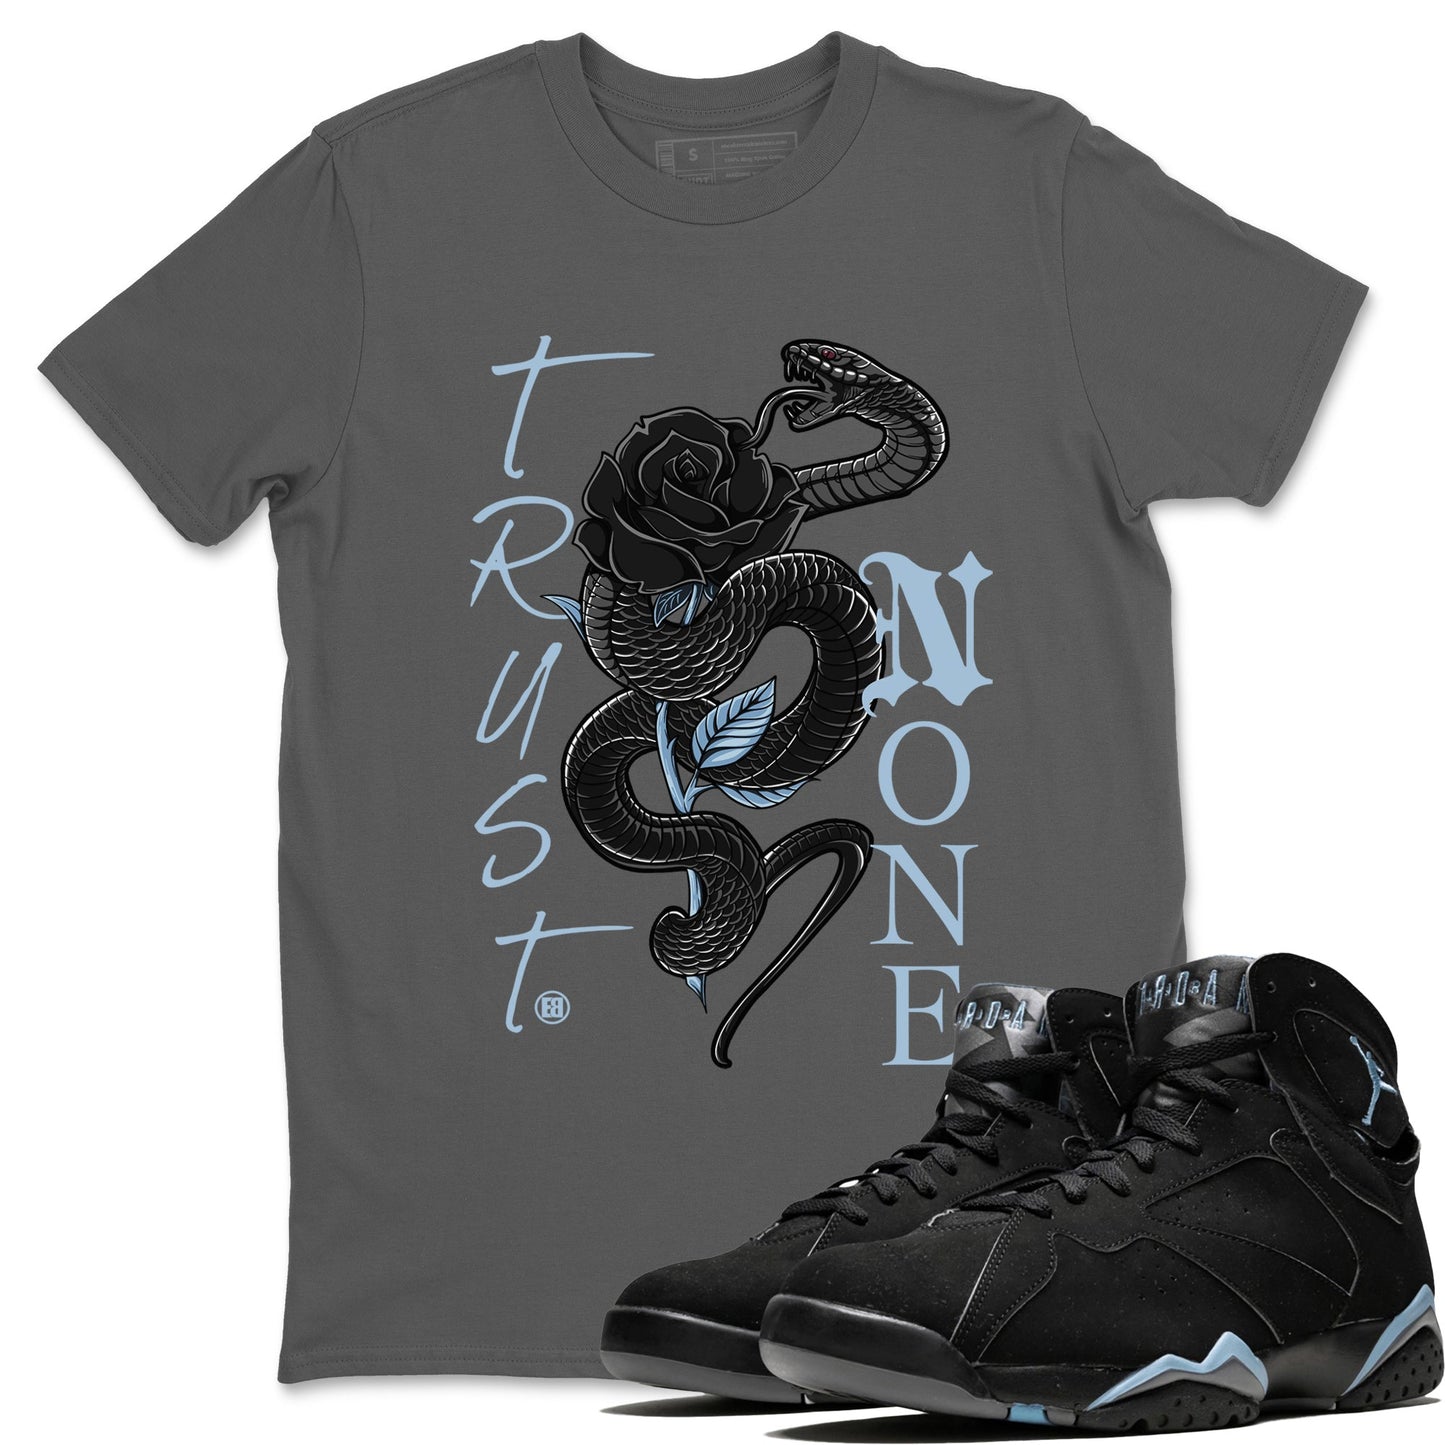 AJ7 Chambray Sneaker Match Tees Trust None Sneaker Tees Air Jordan 7 Chambray Sneaker Release Tees Unisex Shirts Cool Grey 1